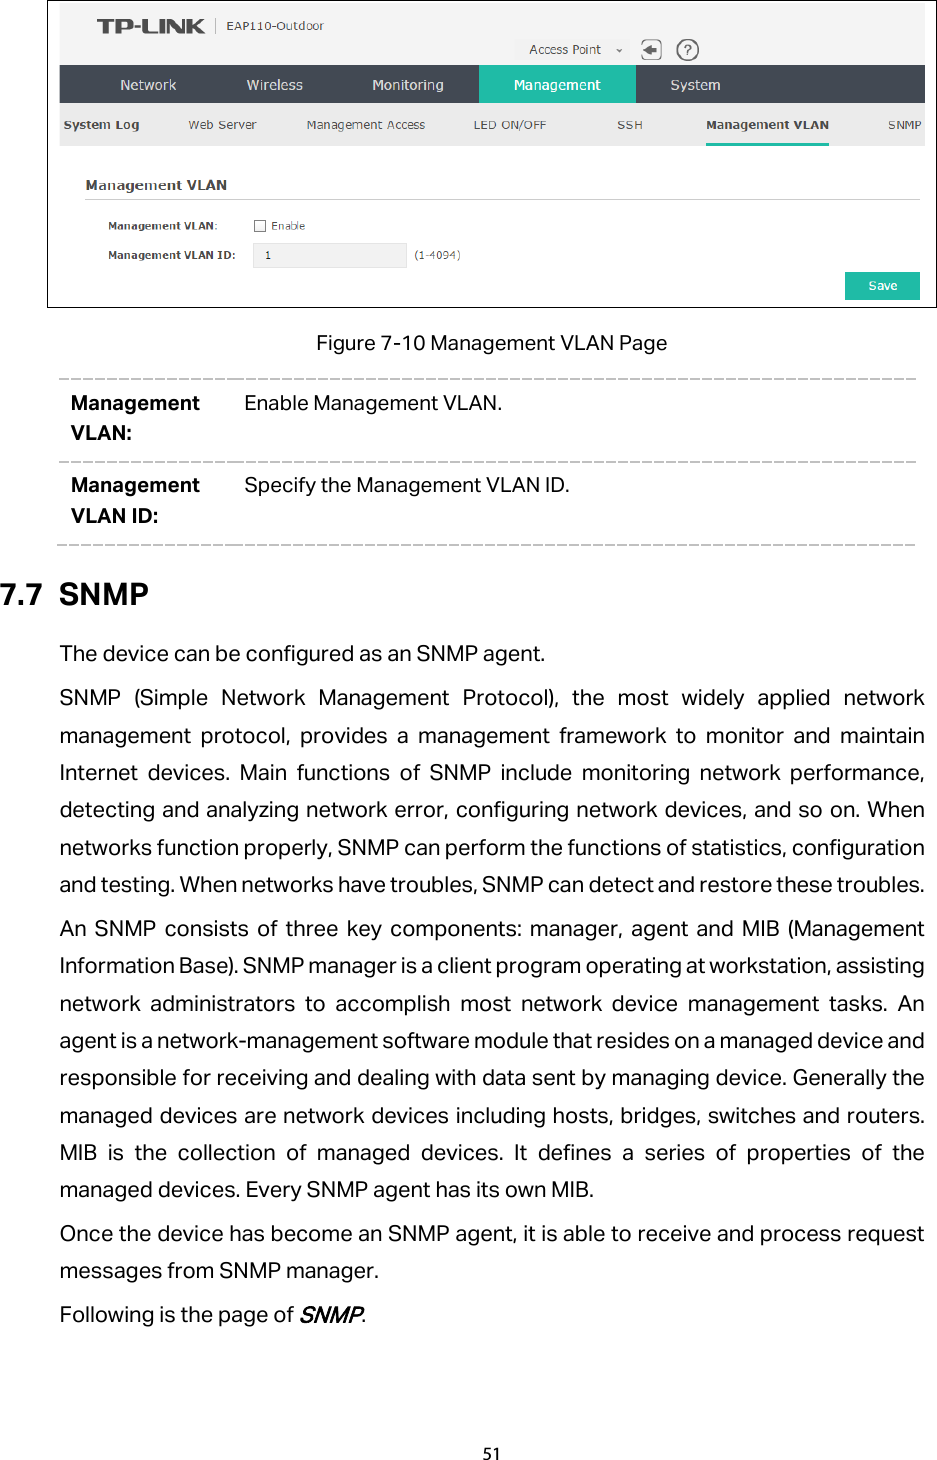  Figure 7-10 Management VLAN Page Management VLAN: Enable Management VLAN. Management VLAN ID: Specify the Management VLAN ID. 7.7 SNMP The device can be configured as an SNMP agent. SNMP (Simple Network Management Protocol), the most widely applied network management protocol, provides a management framework to monitor and maintain Internet devices. Main functions of SNMP include monitoring network performance, detecting and analyzing network error, configuring network devices, and so on. When networks function properly, SNMP can perform the functions of statistics, configuration and testing. When networks have troubles, SNMP can detect and restore these troubles. An SNMP consists of three key components: manager, agent and MIB (Management Information Base). SNMP manager is a client program operating at workstation, assisting network administrators to accomplish most network device management tasks. An agent is a network-management software module that resides on a managed device and responsible for receiving and dealing with data sent by managing device. Generally the managed devices are network devices including hosts, bridges, switches and routers. MIB is the collection of managed devices. It defines a series of properties of the managed devices. Every SNMP agent has its own MIB. Once the device has become an SNMP agent, it is able to receive and process request messages from SNMP manager. Following is the page of SNMP. 51  